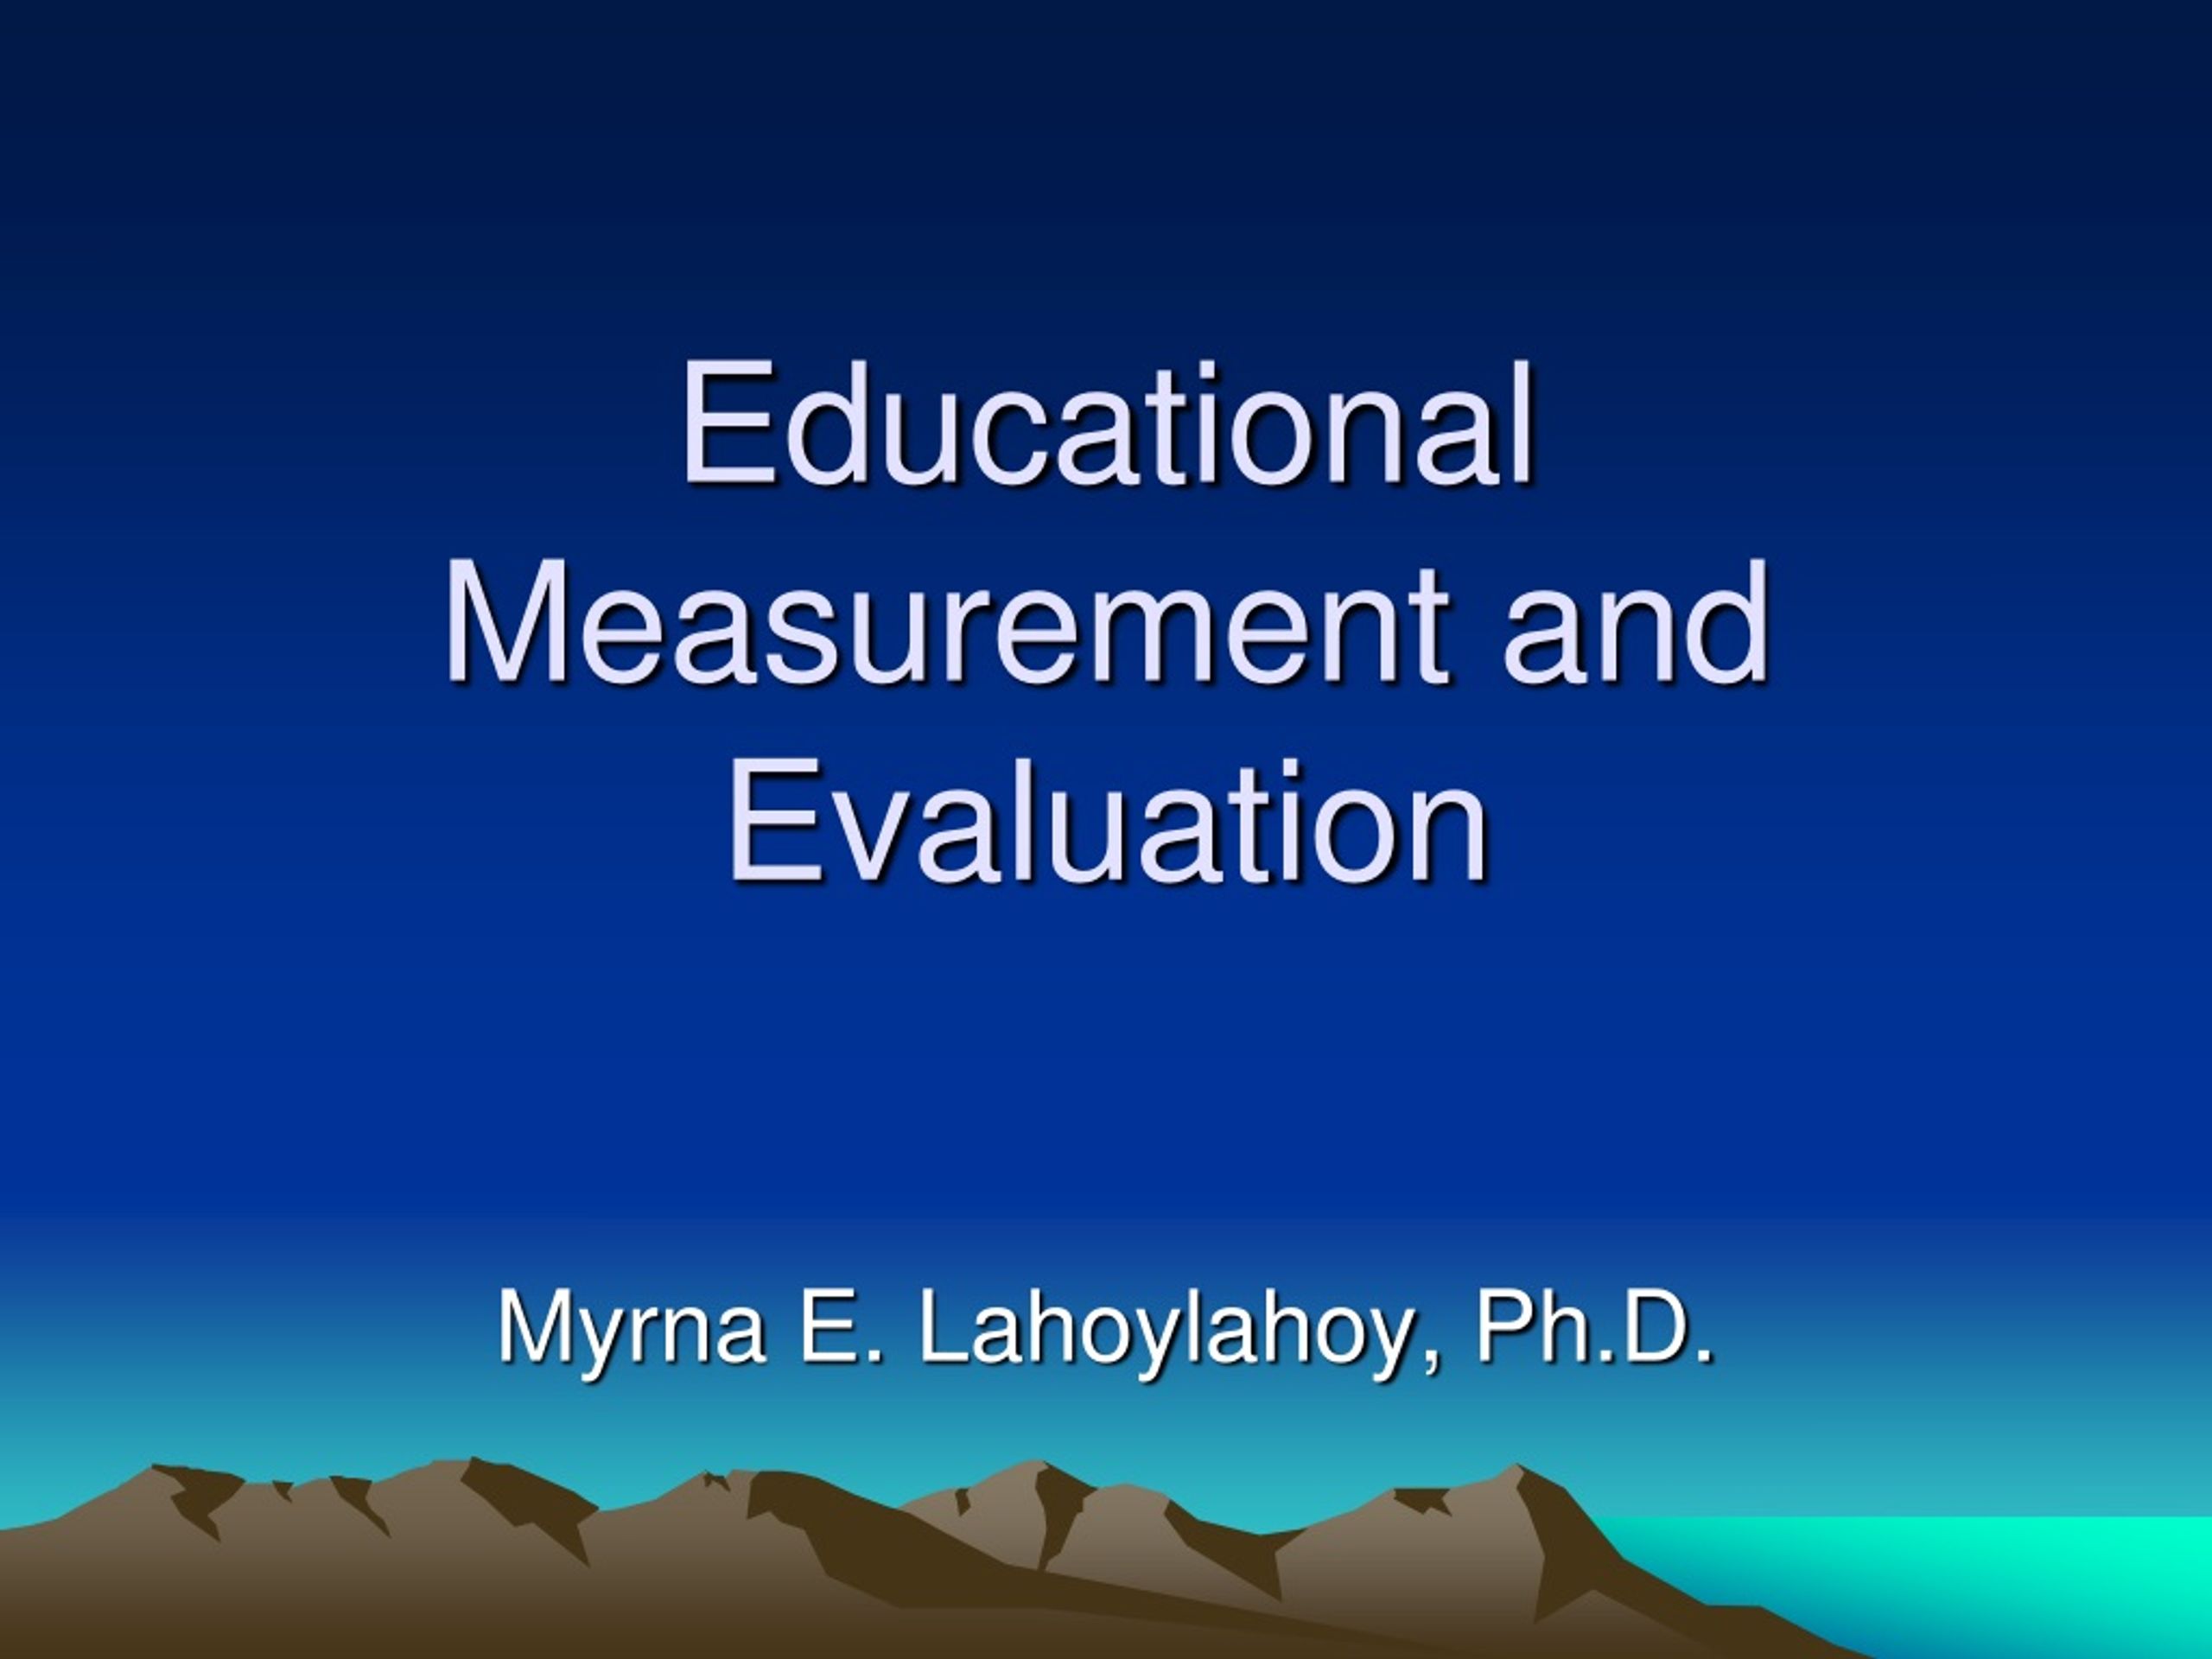 ppt on educational measurement and evaluation